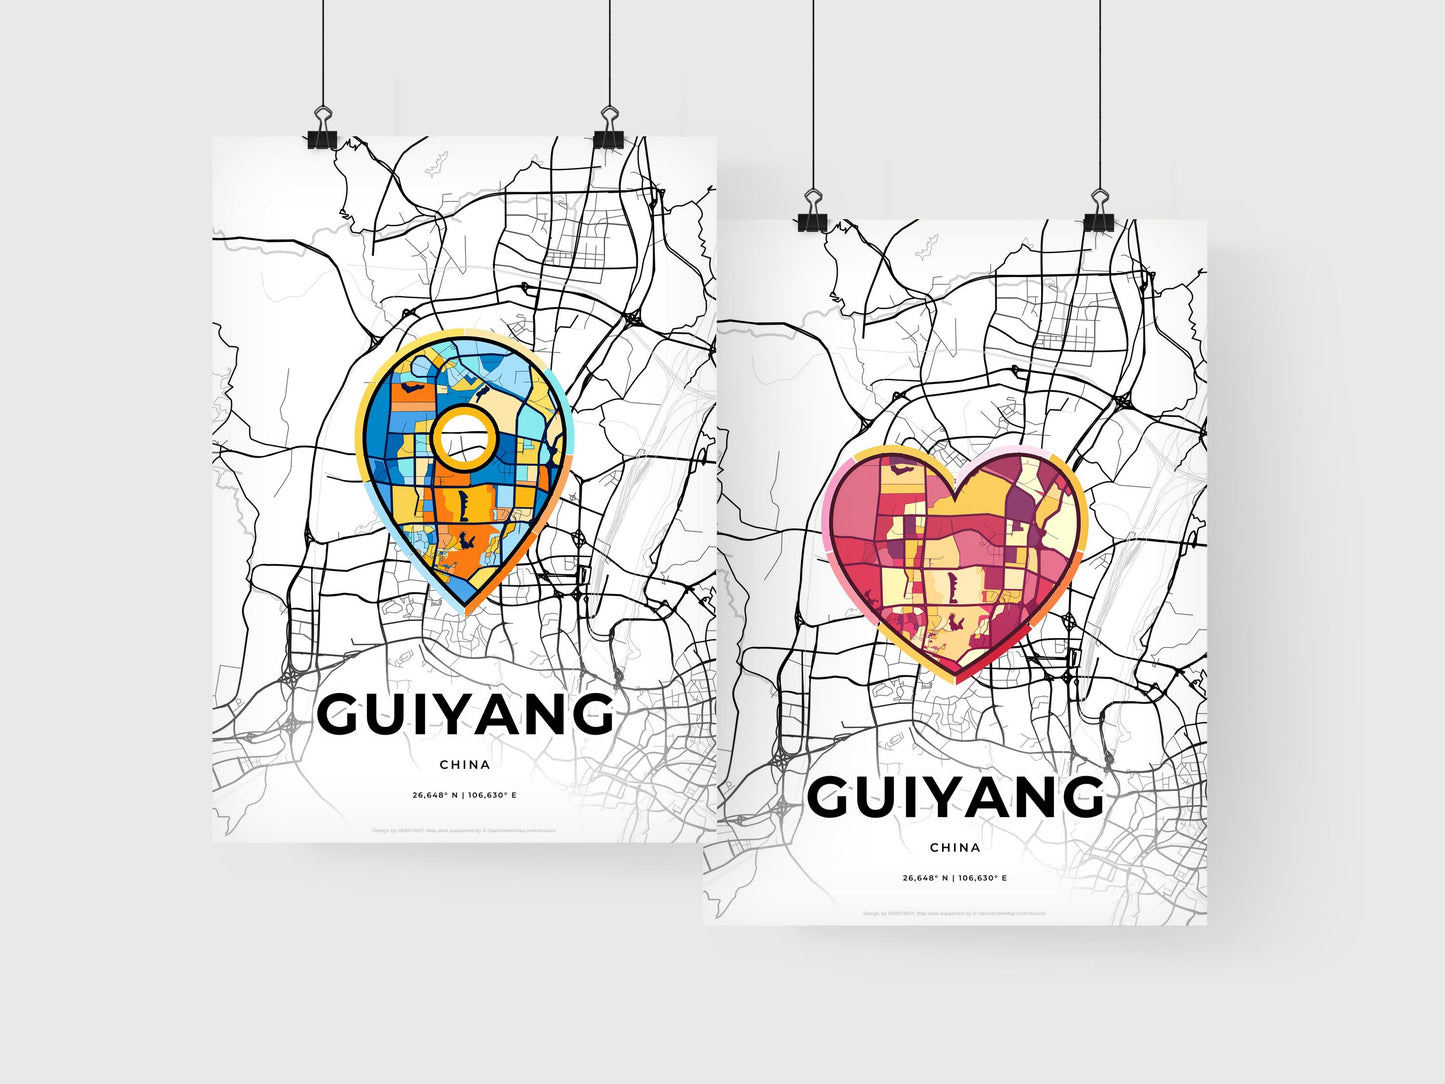 GUIYANG CHINA minimal art map with a colorful icon. Where it all began, Couple map gift.